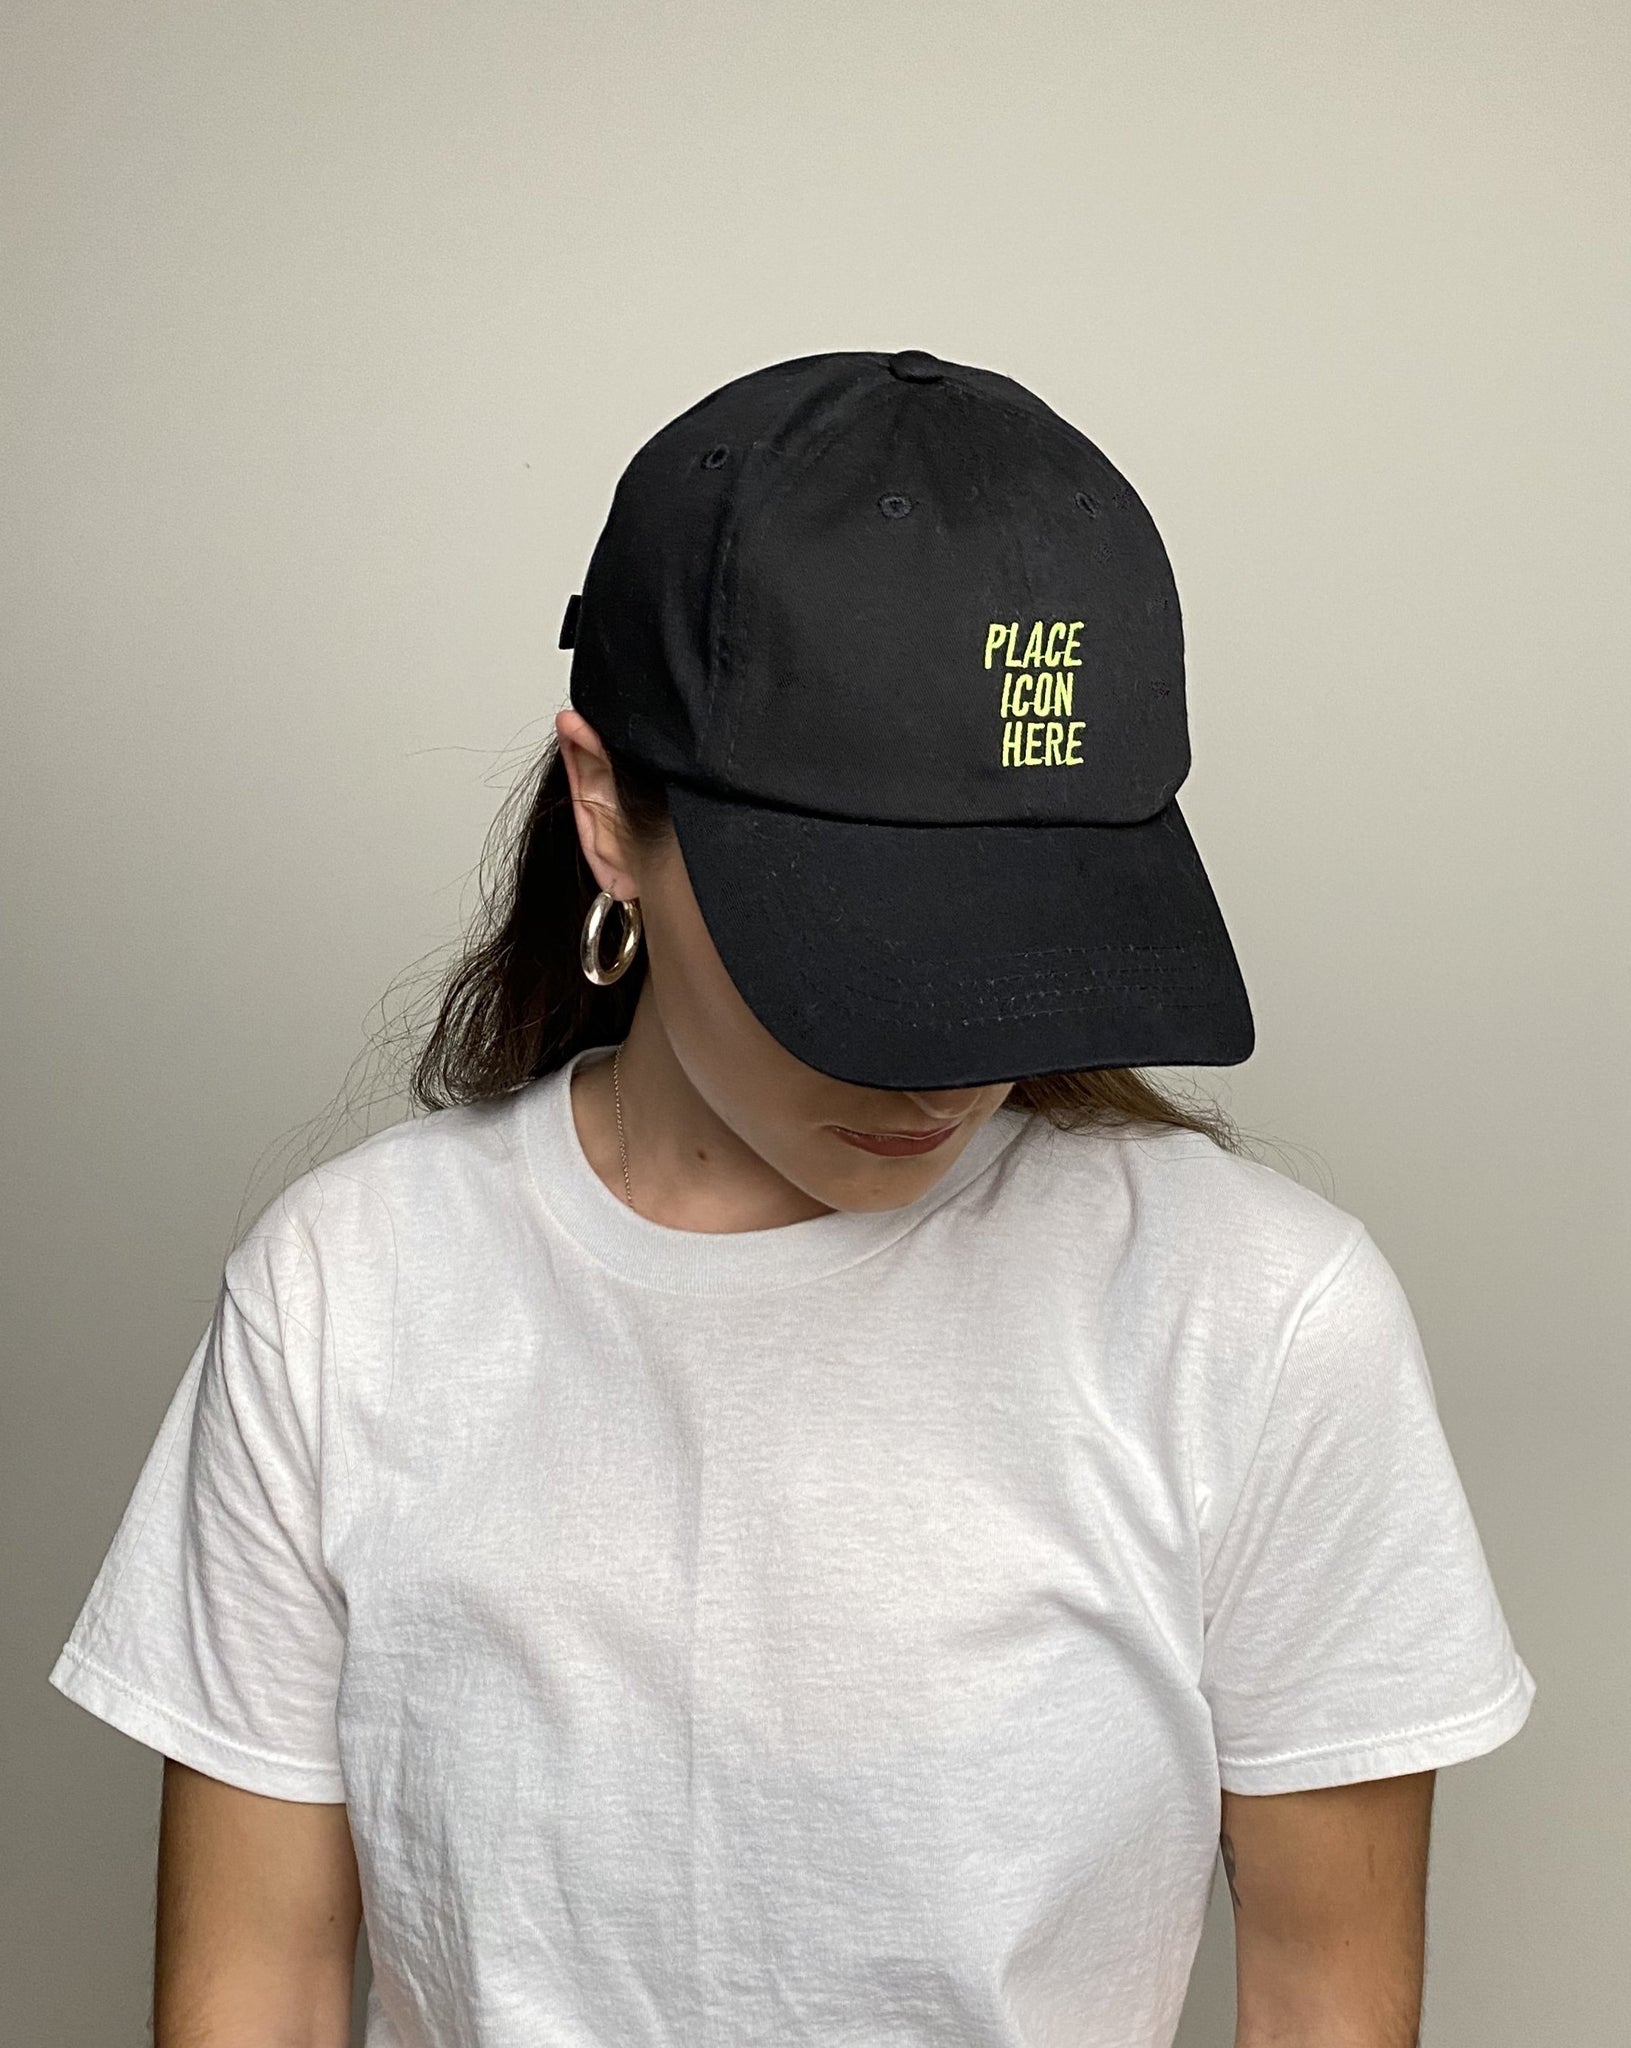 “Place Icon Here” Baseball Cap